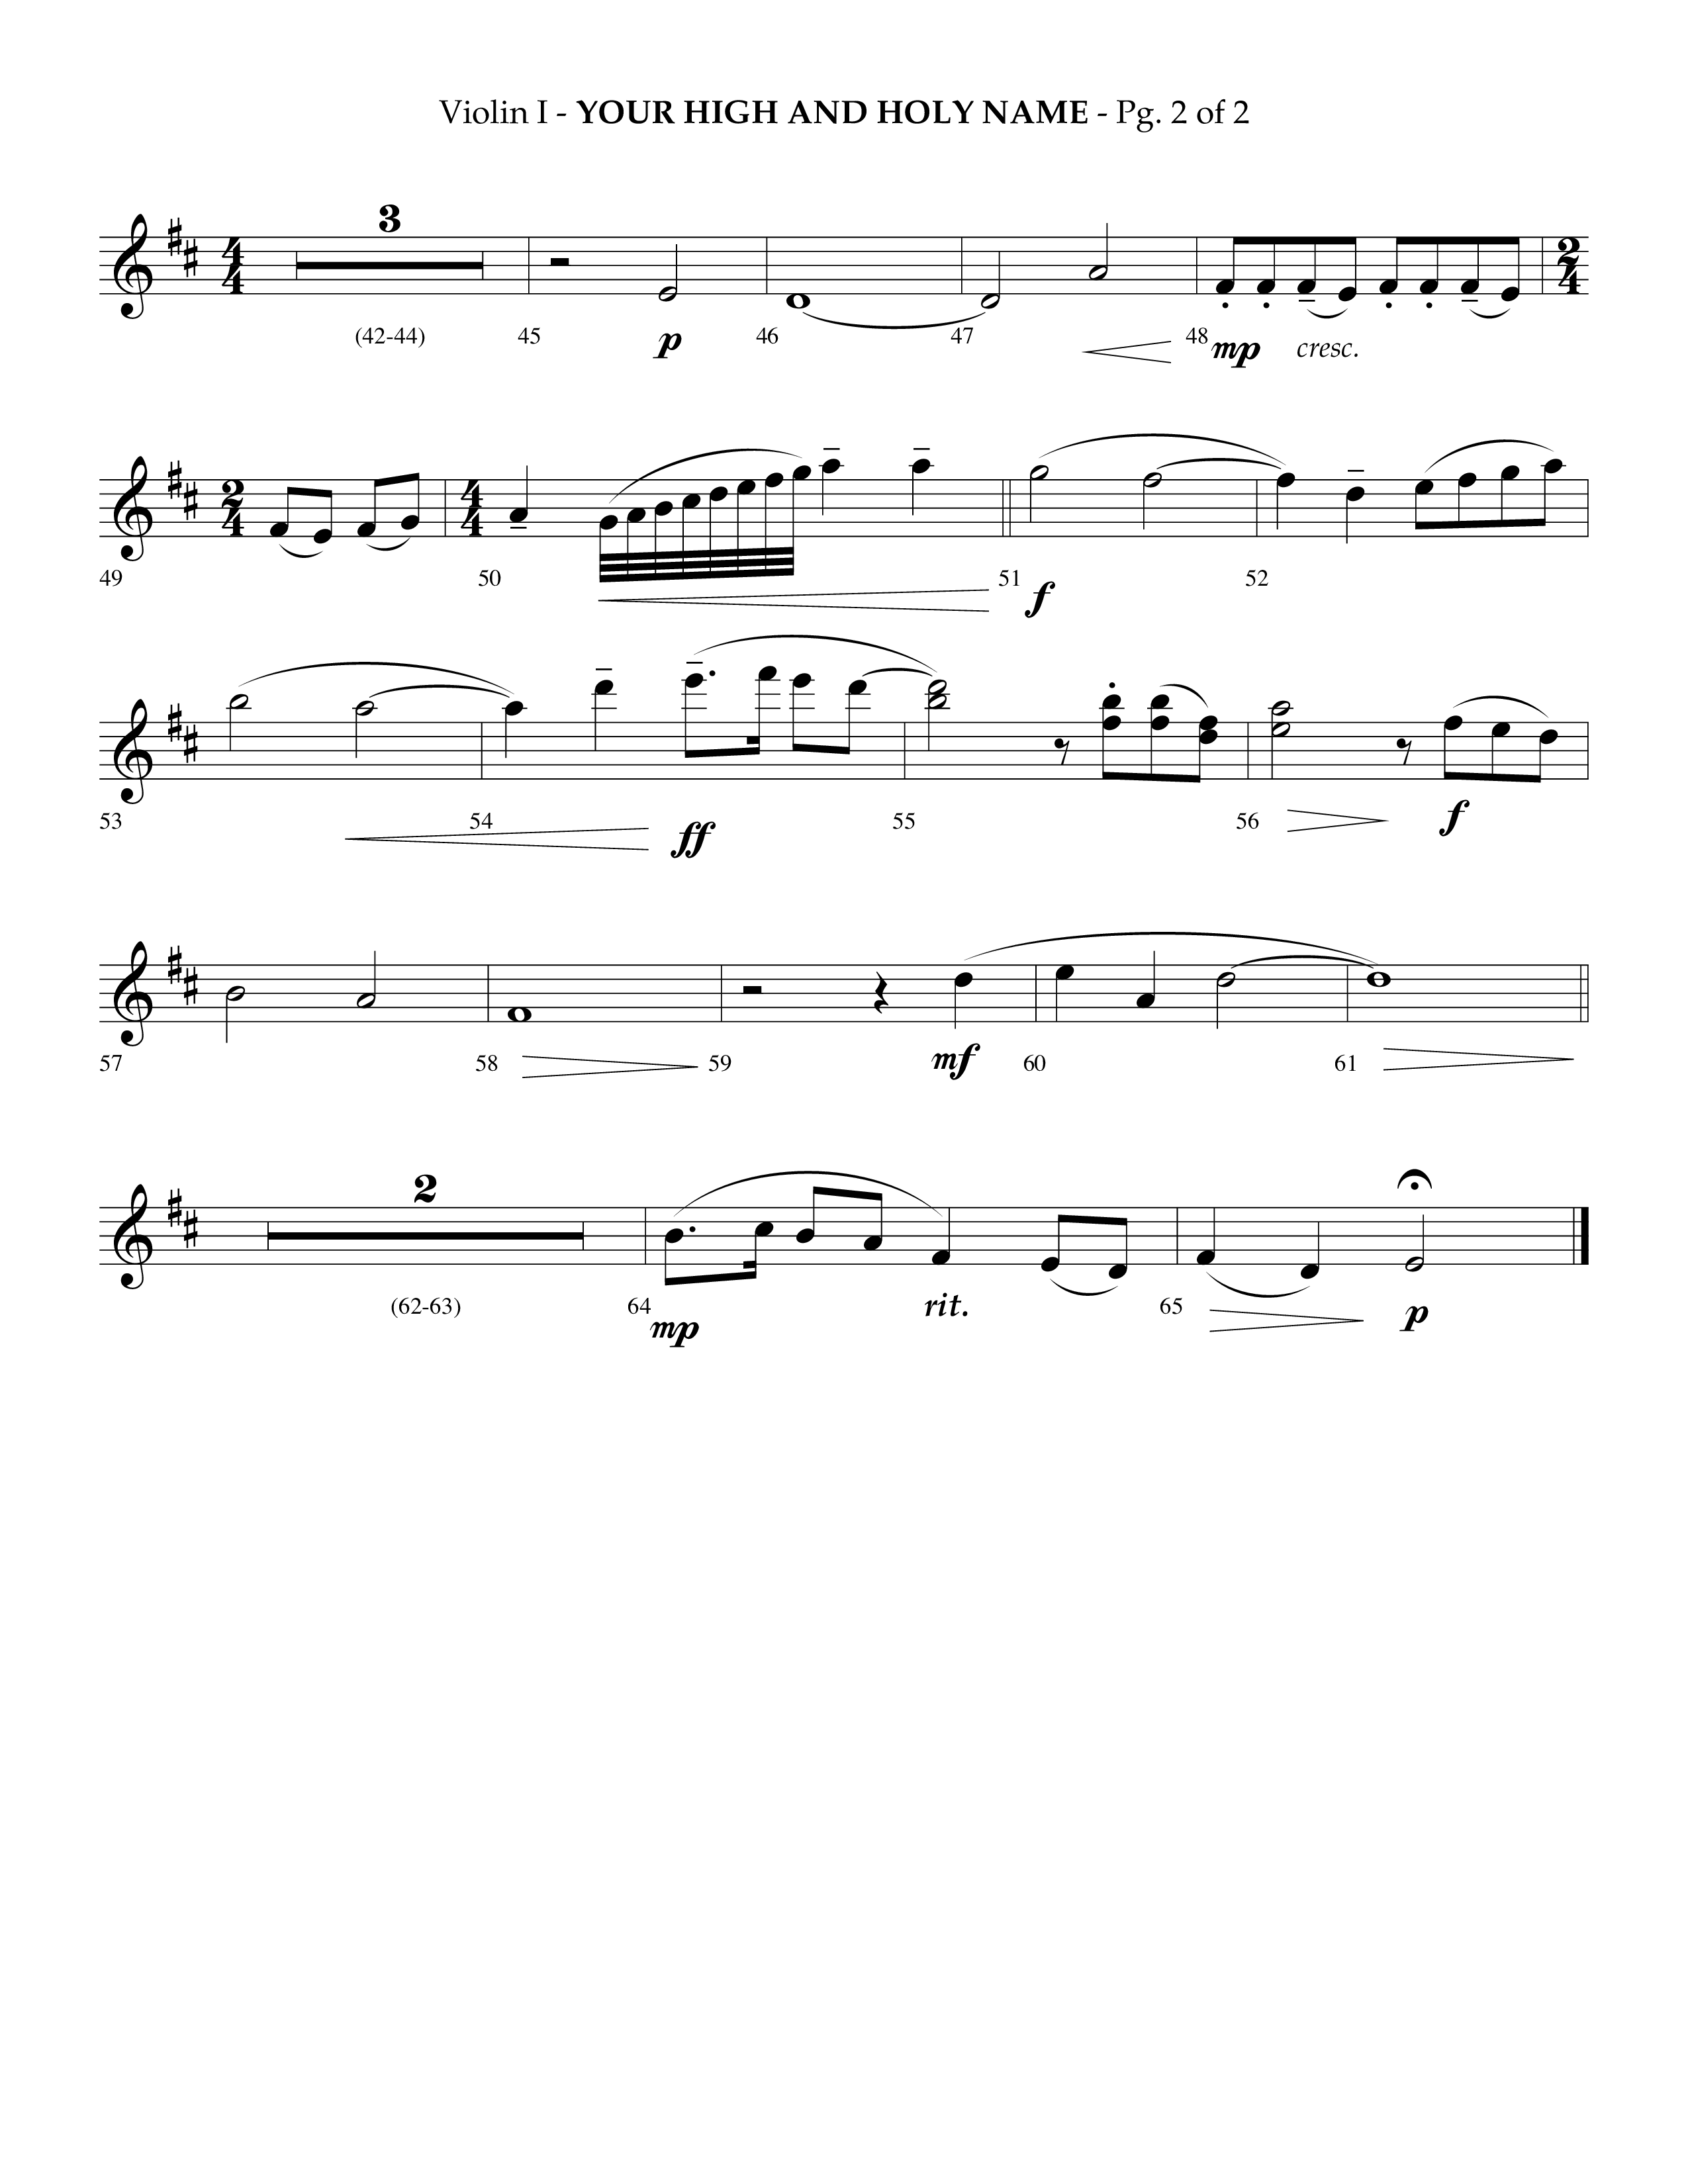 Your High And Holy Name (Choral Anthem SATB) Violin 1 (Lifeway Choral / Arr. Phillip Keveren / Orch. Danny Mitchell)